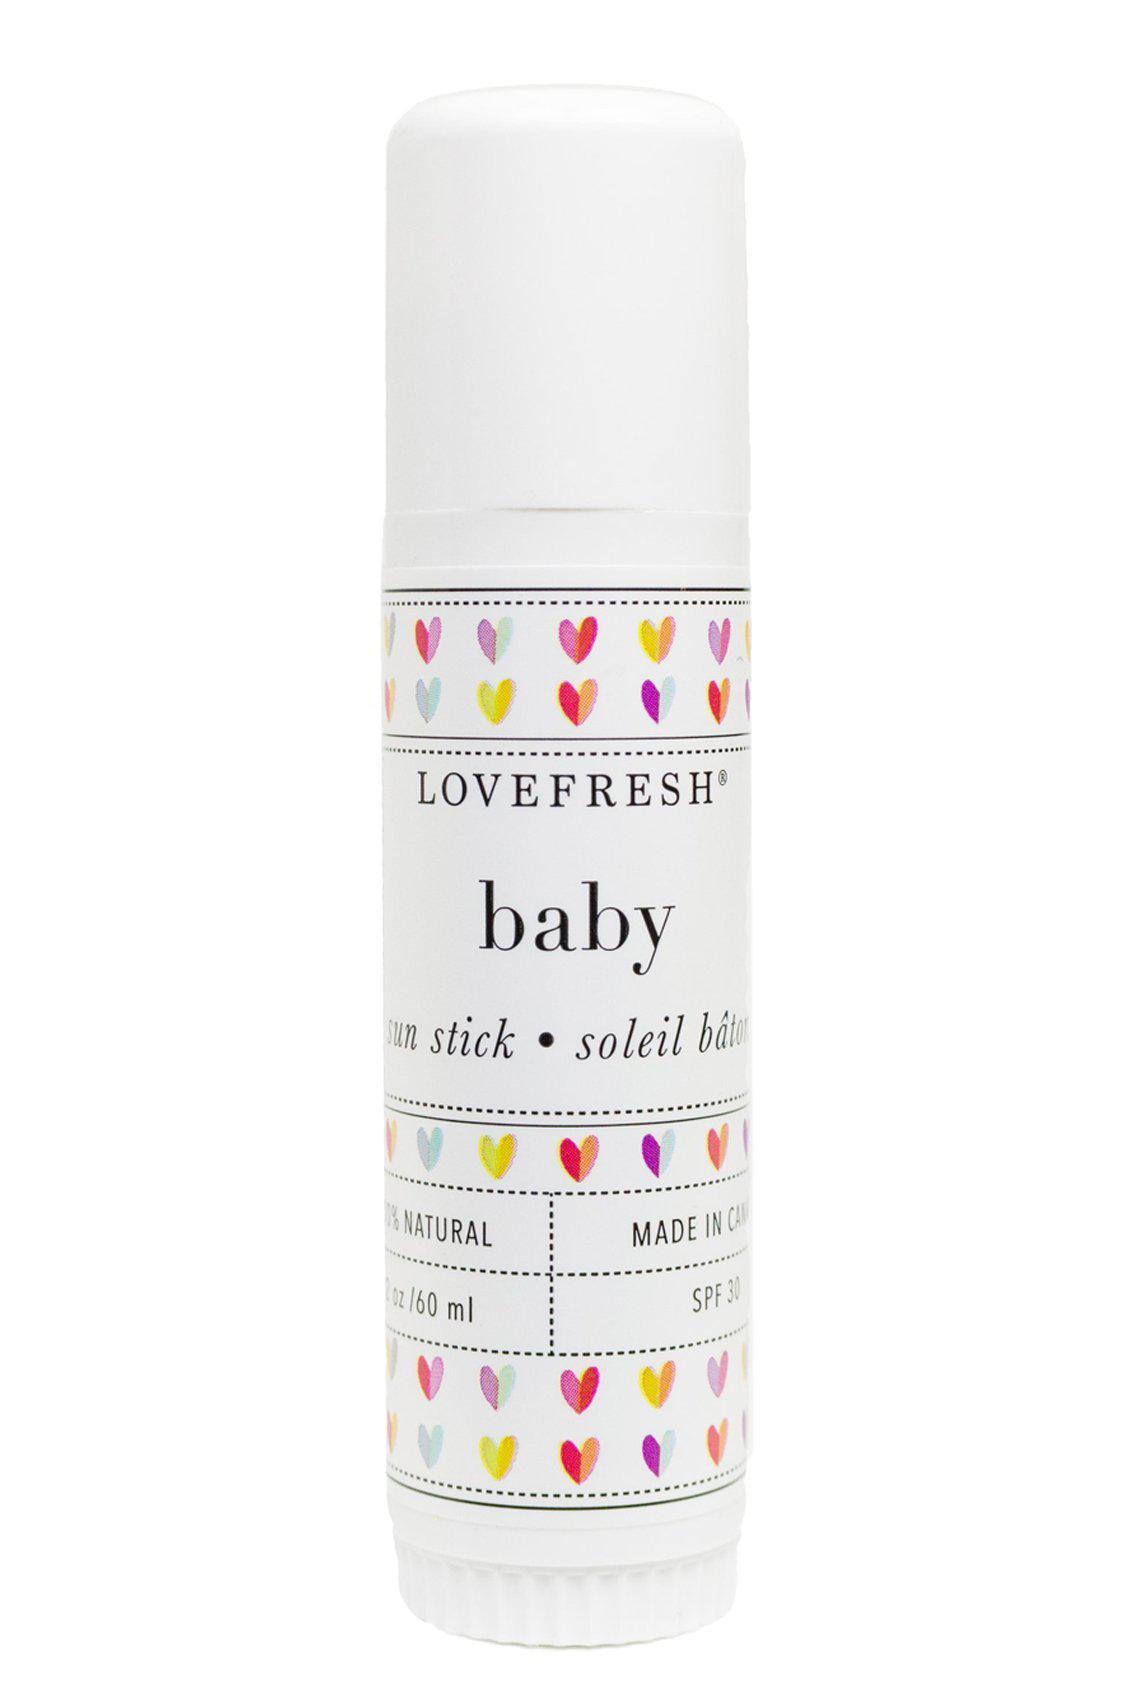 Indisponible : Baby Sun Care Stick Indisponible : Baby Sun Care Stick - Lovefresh